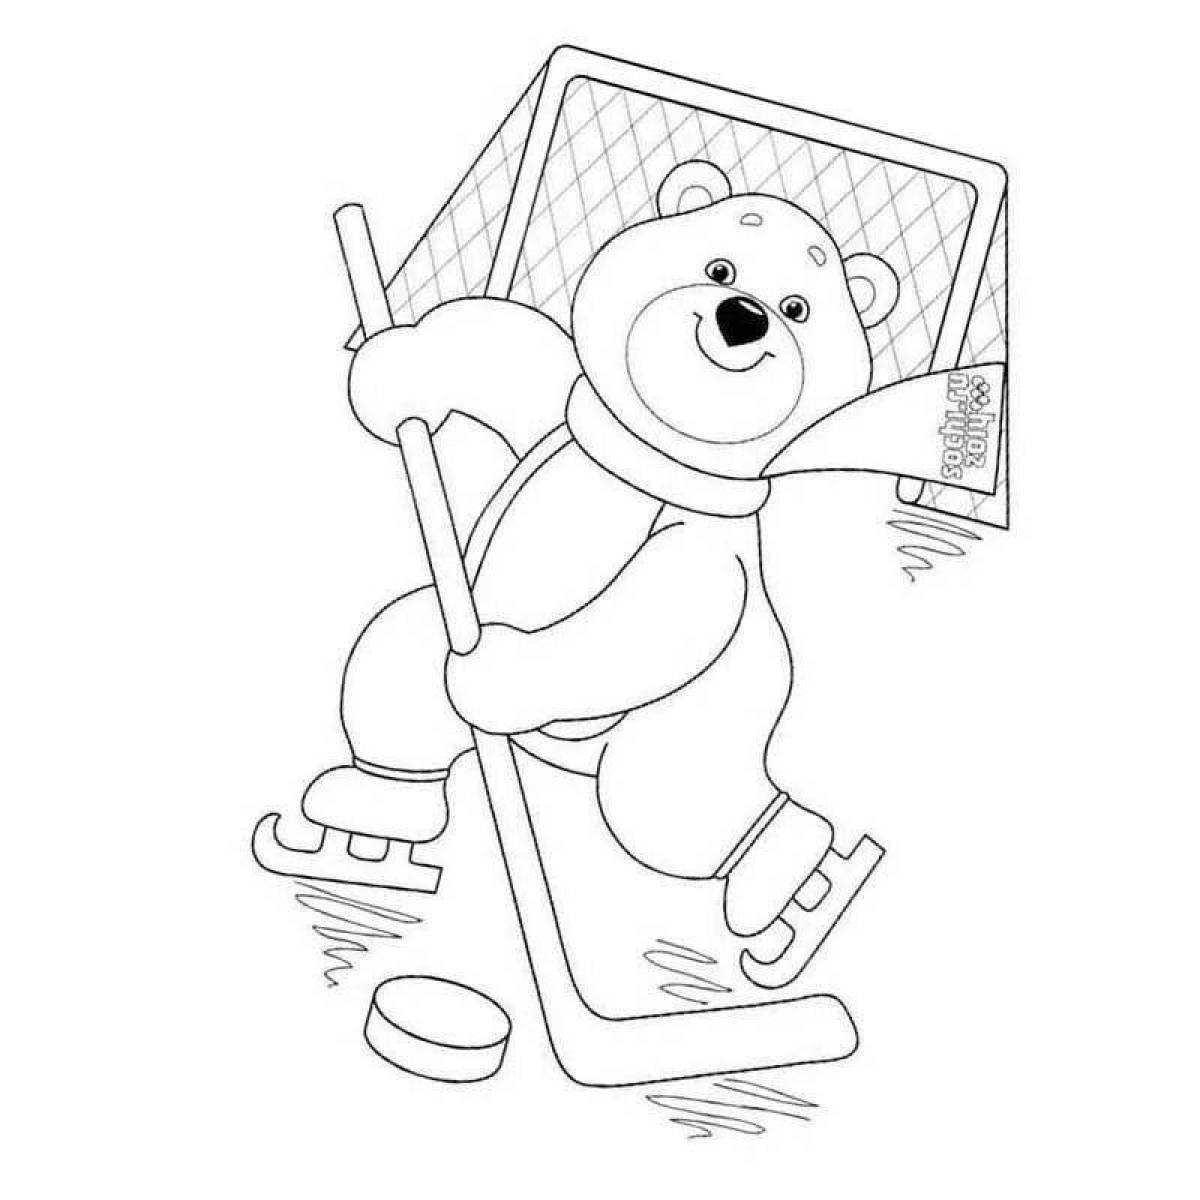 Great winter sports coloring book for preschoolers